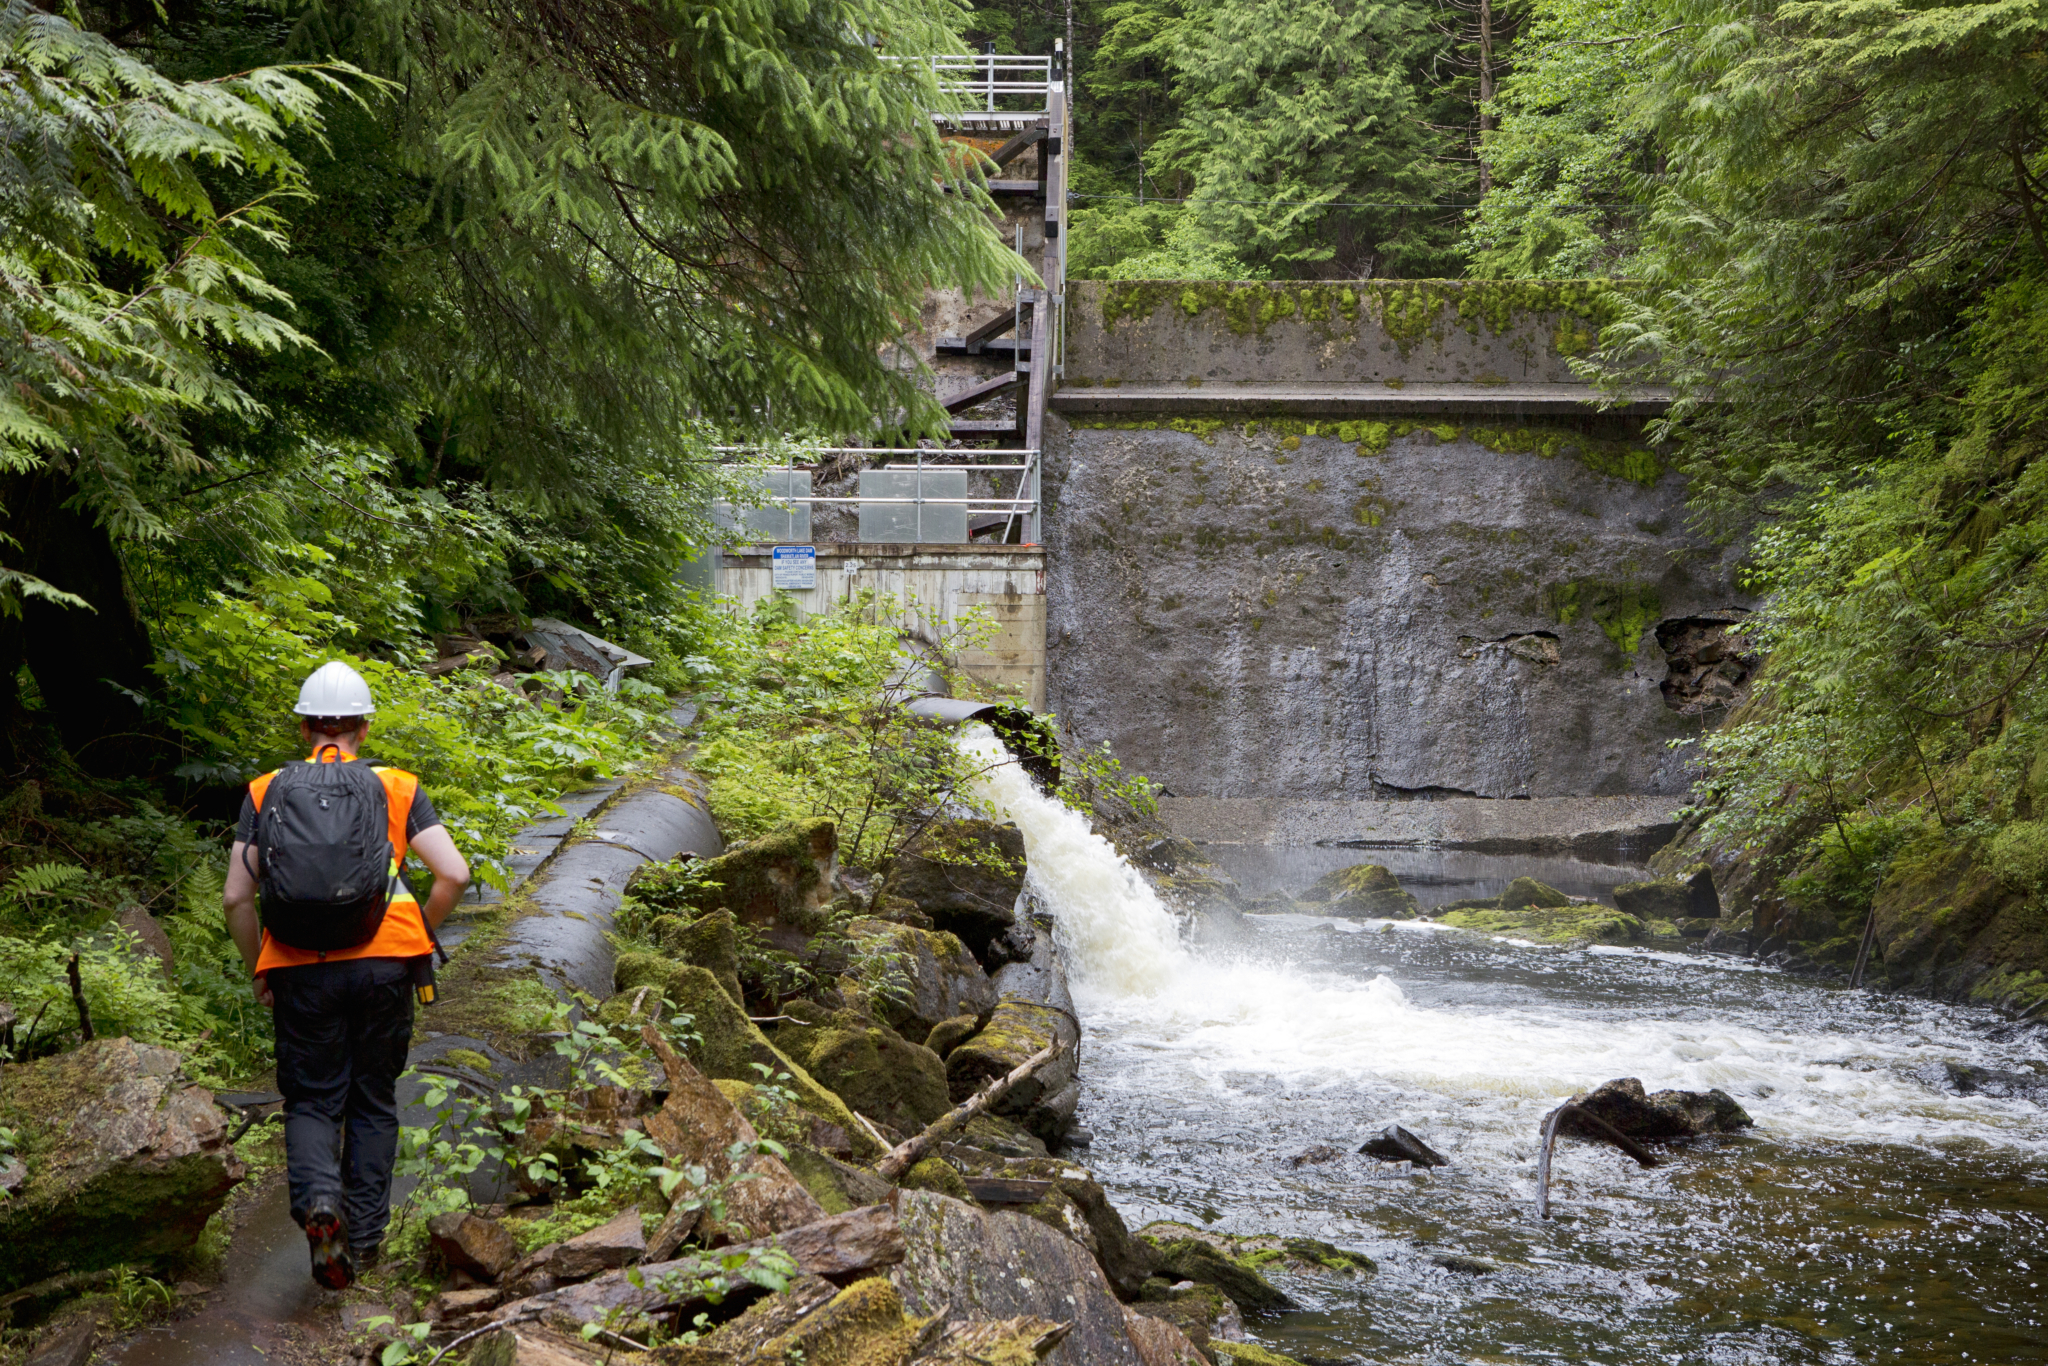 Hans Seidemann, manager of community development and civic innovation for the city of Prince Rupert, British Columbia, featured in the October issue, approaches the 100-year-old Woodworth Dam in an isolated forest preserve on Kaien Island. The city has secured grant funds to replace the dam, which holds back Woodworth Lake, the city’s primary water source.